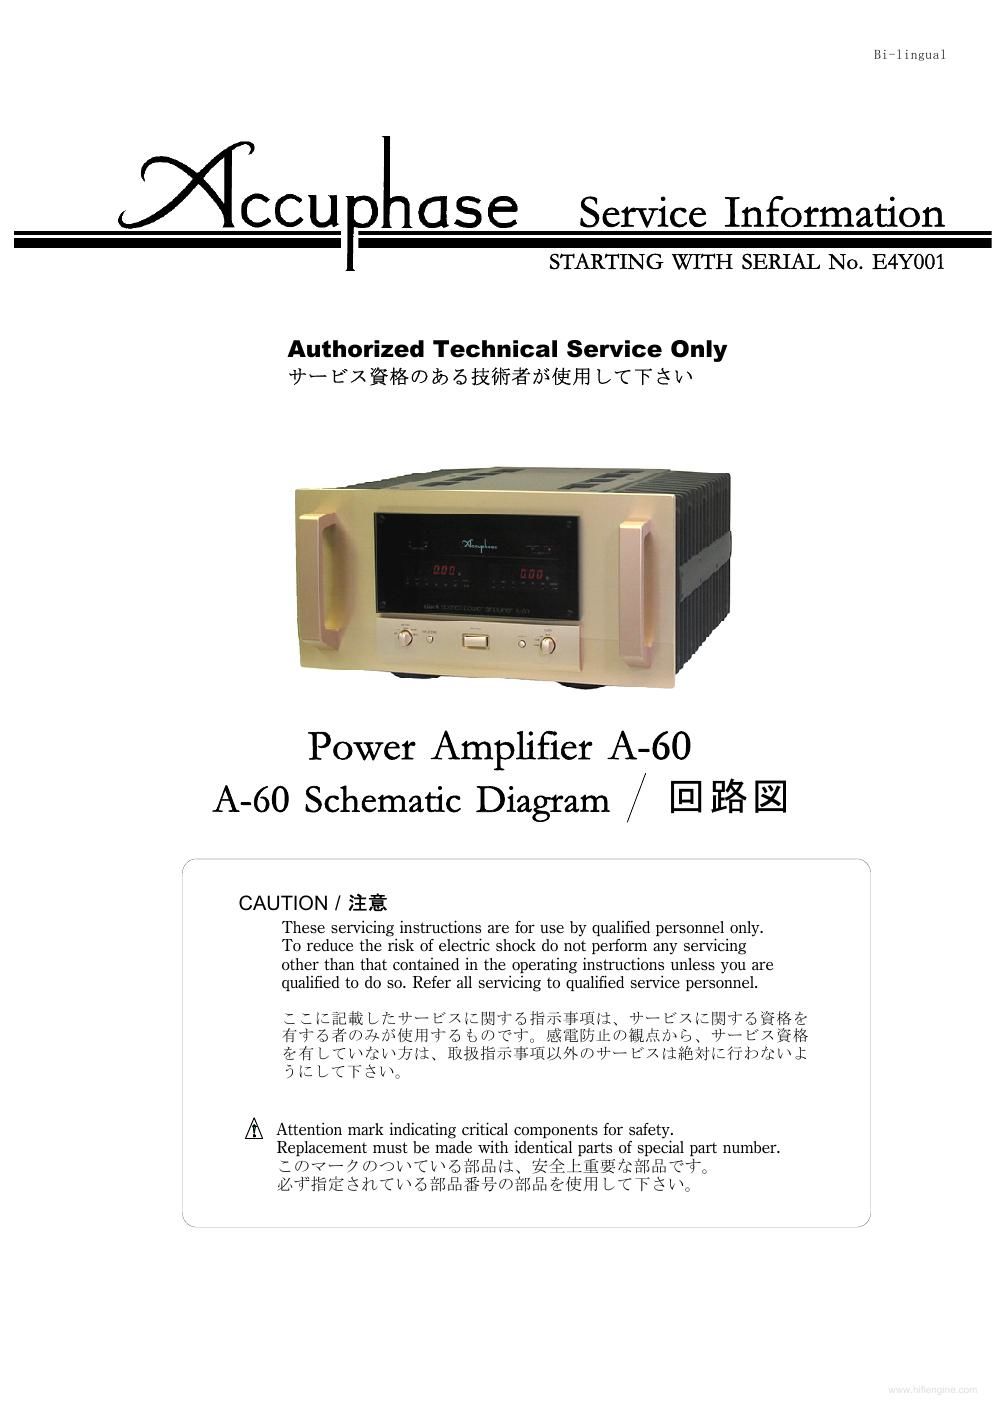 accuphase a60 servicemanual